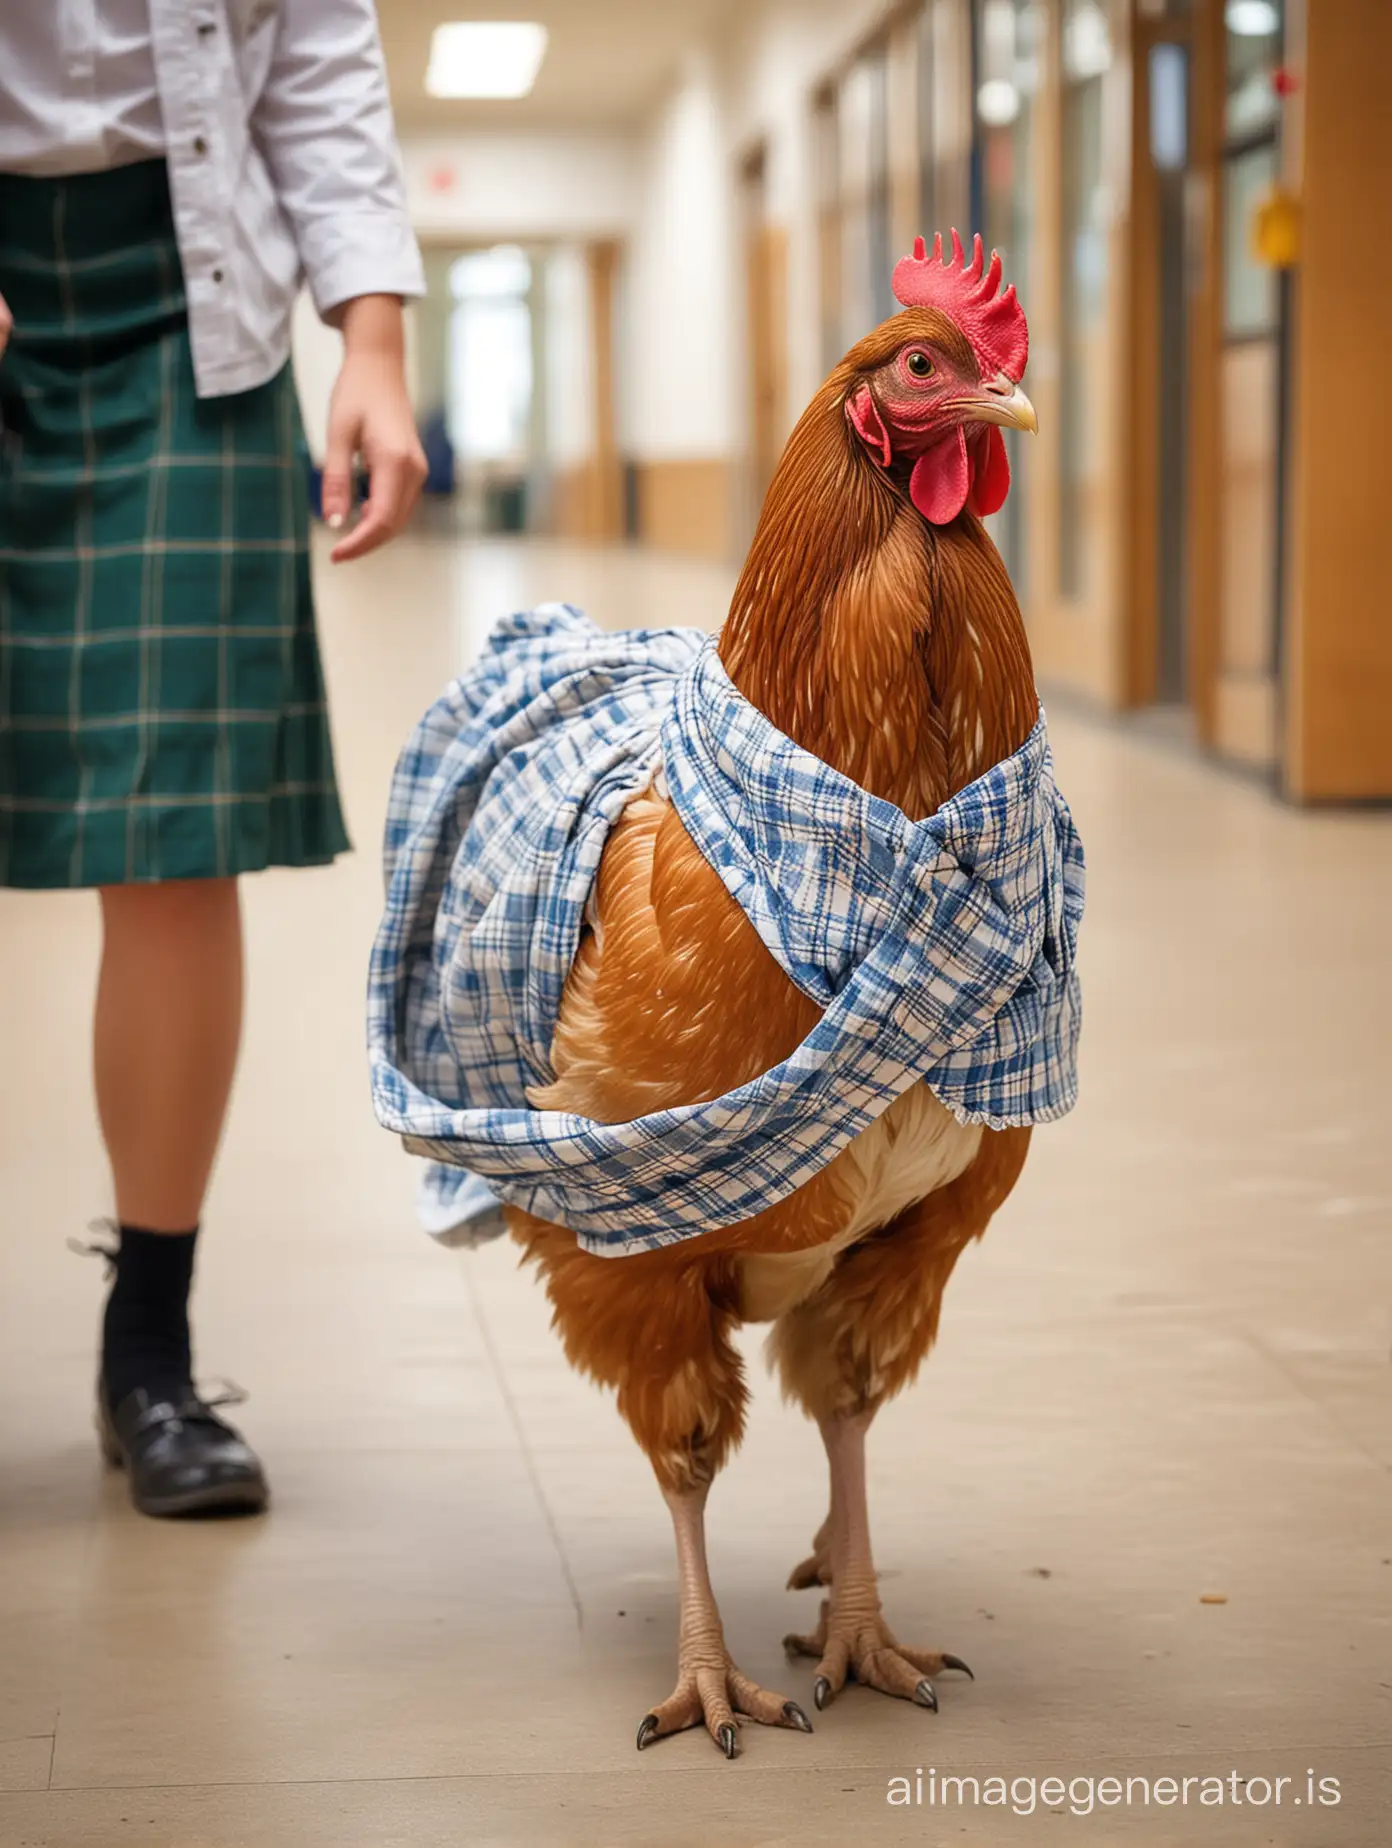 a hen that wearing schol manger cloths walking in the school. show details and school atmospher properly